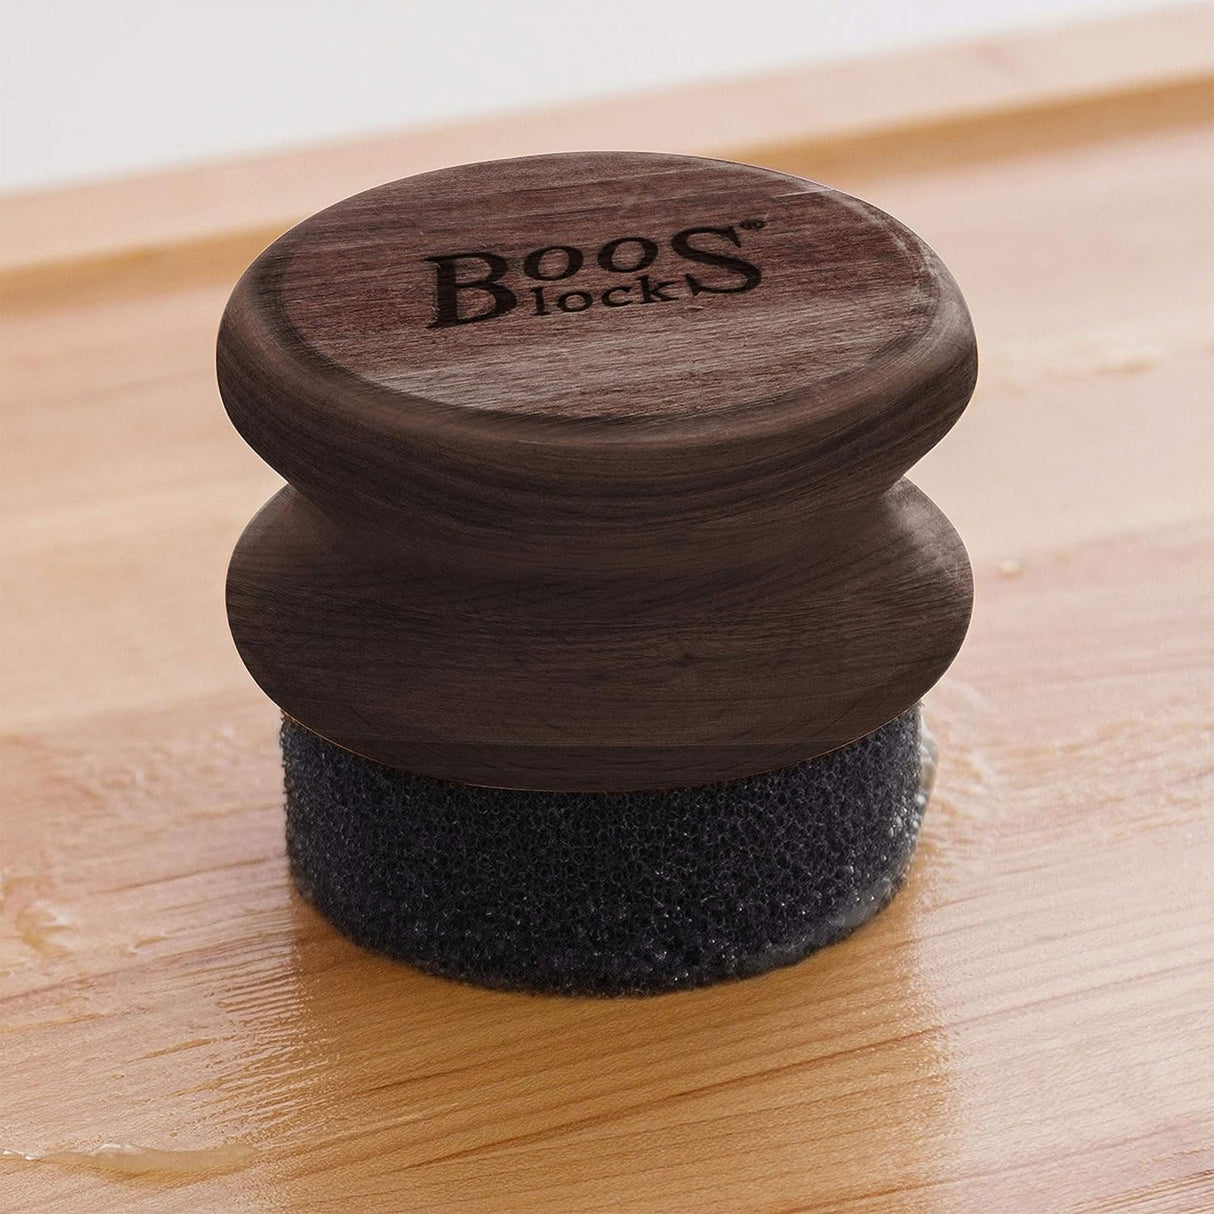 John Boos APPLICRND-W Oil & Cream Applicator for Smooth Finishes on Wood Cutting Boards, Butcher Block and Countertops, Chopping/Charcuteries Essential APPLICATOR ROUND WALNUT 1 PER -RM